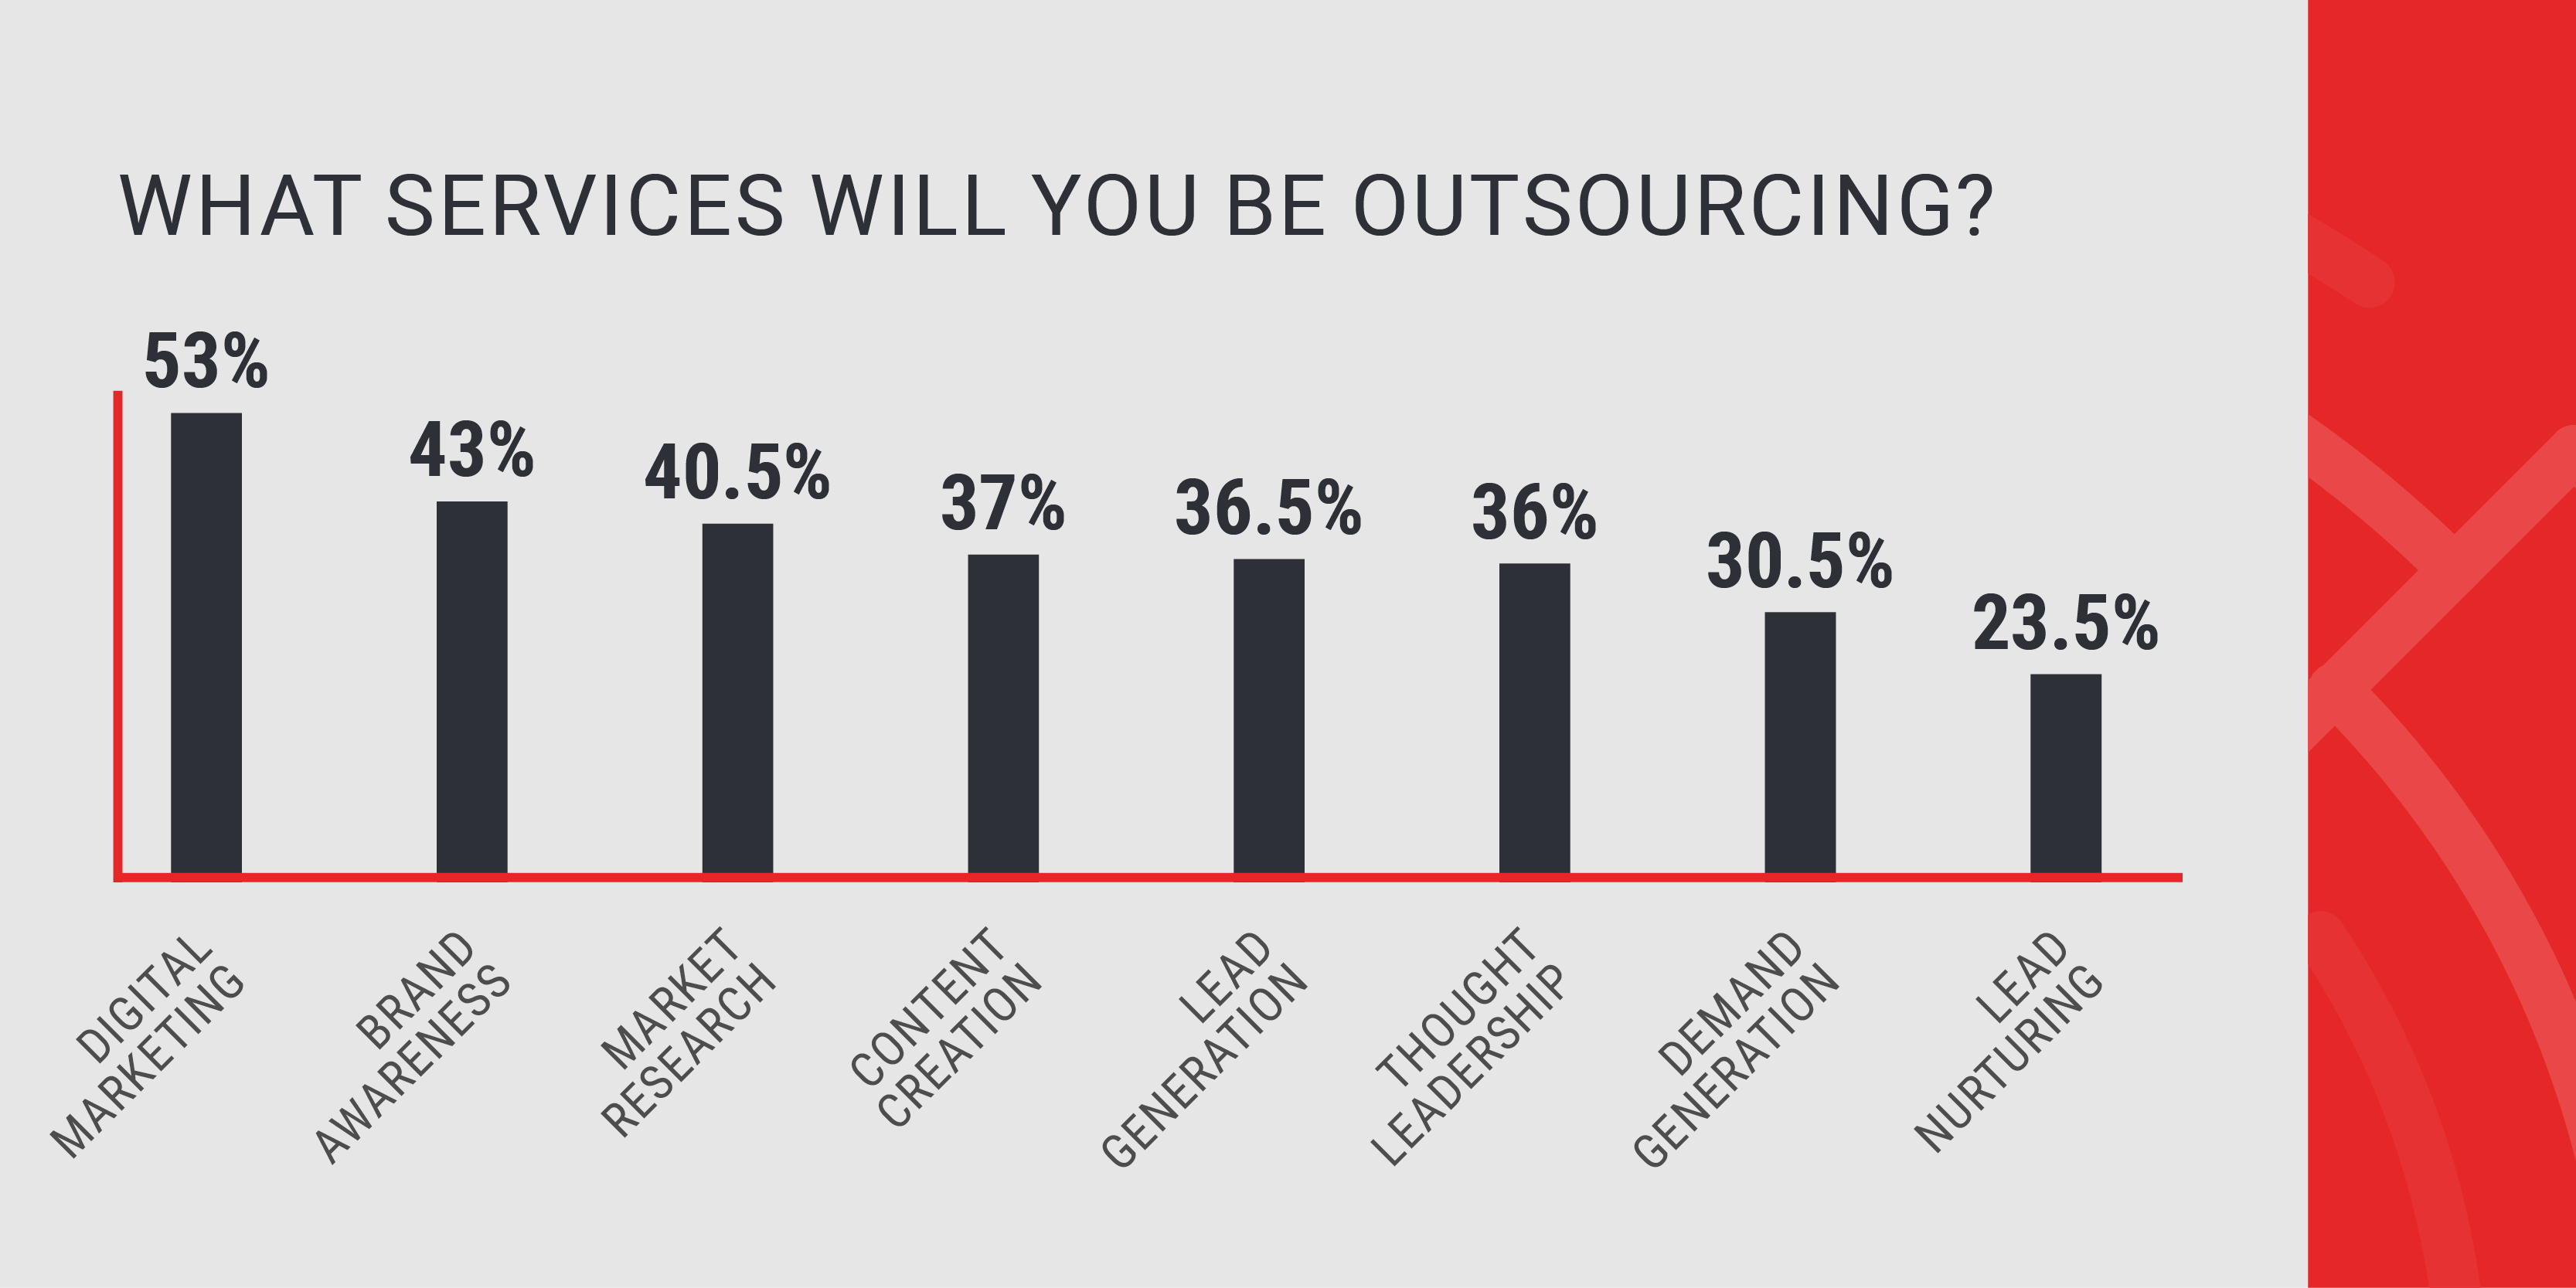 What services will you be outsourcing?